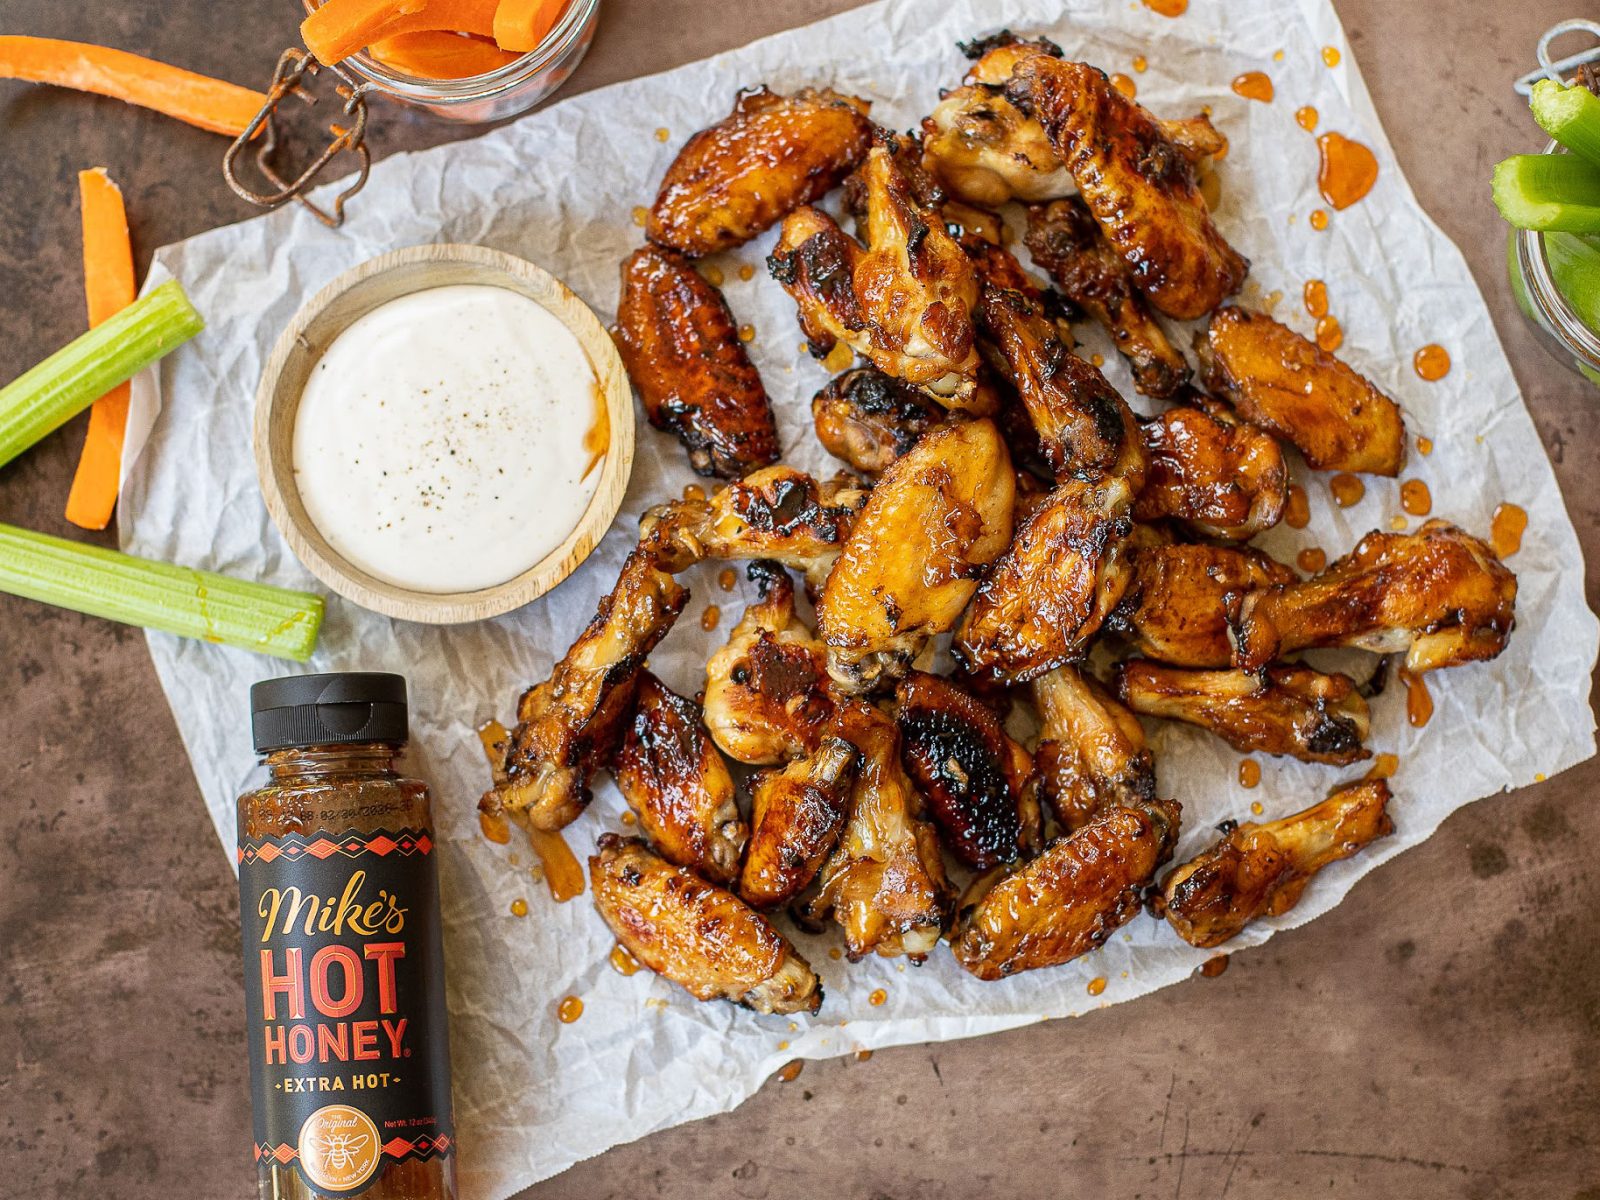 Pick Up A Deal On Mike’s Hot Honey – Extra Hot For Your Game Day Hot Chicken Wings!